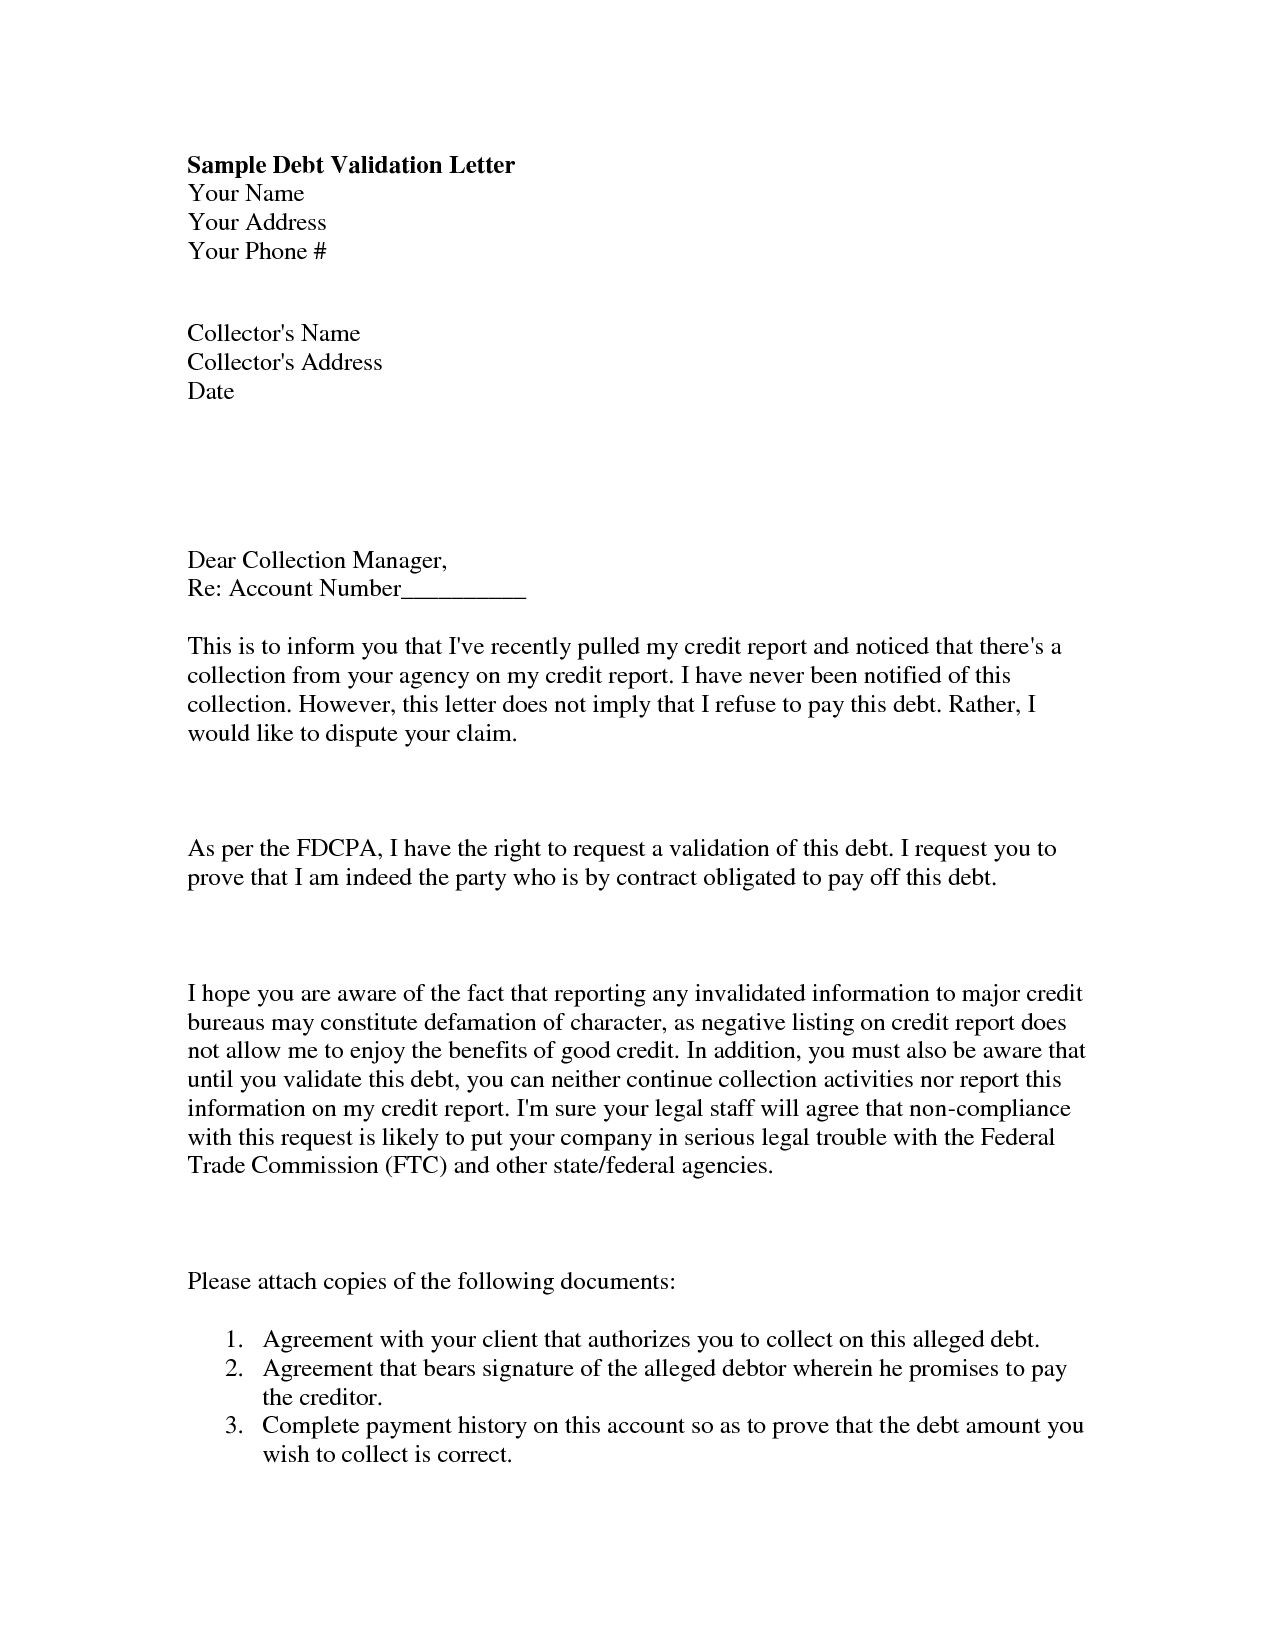 Credit Agency Dispute Letter Template - New Dispute Letter to Credit Bureau Template